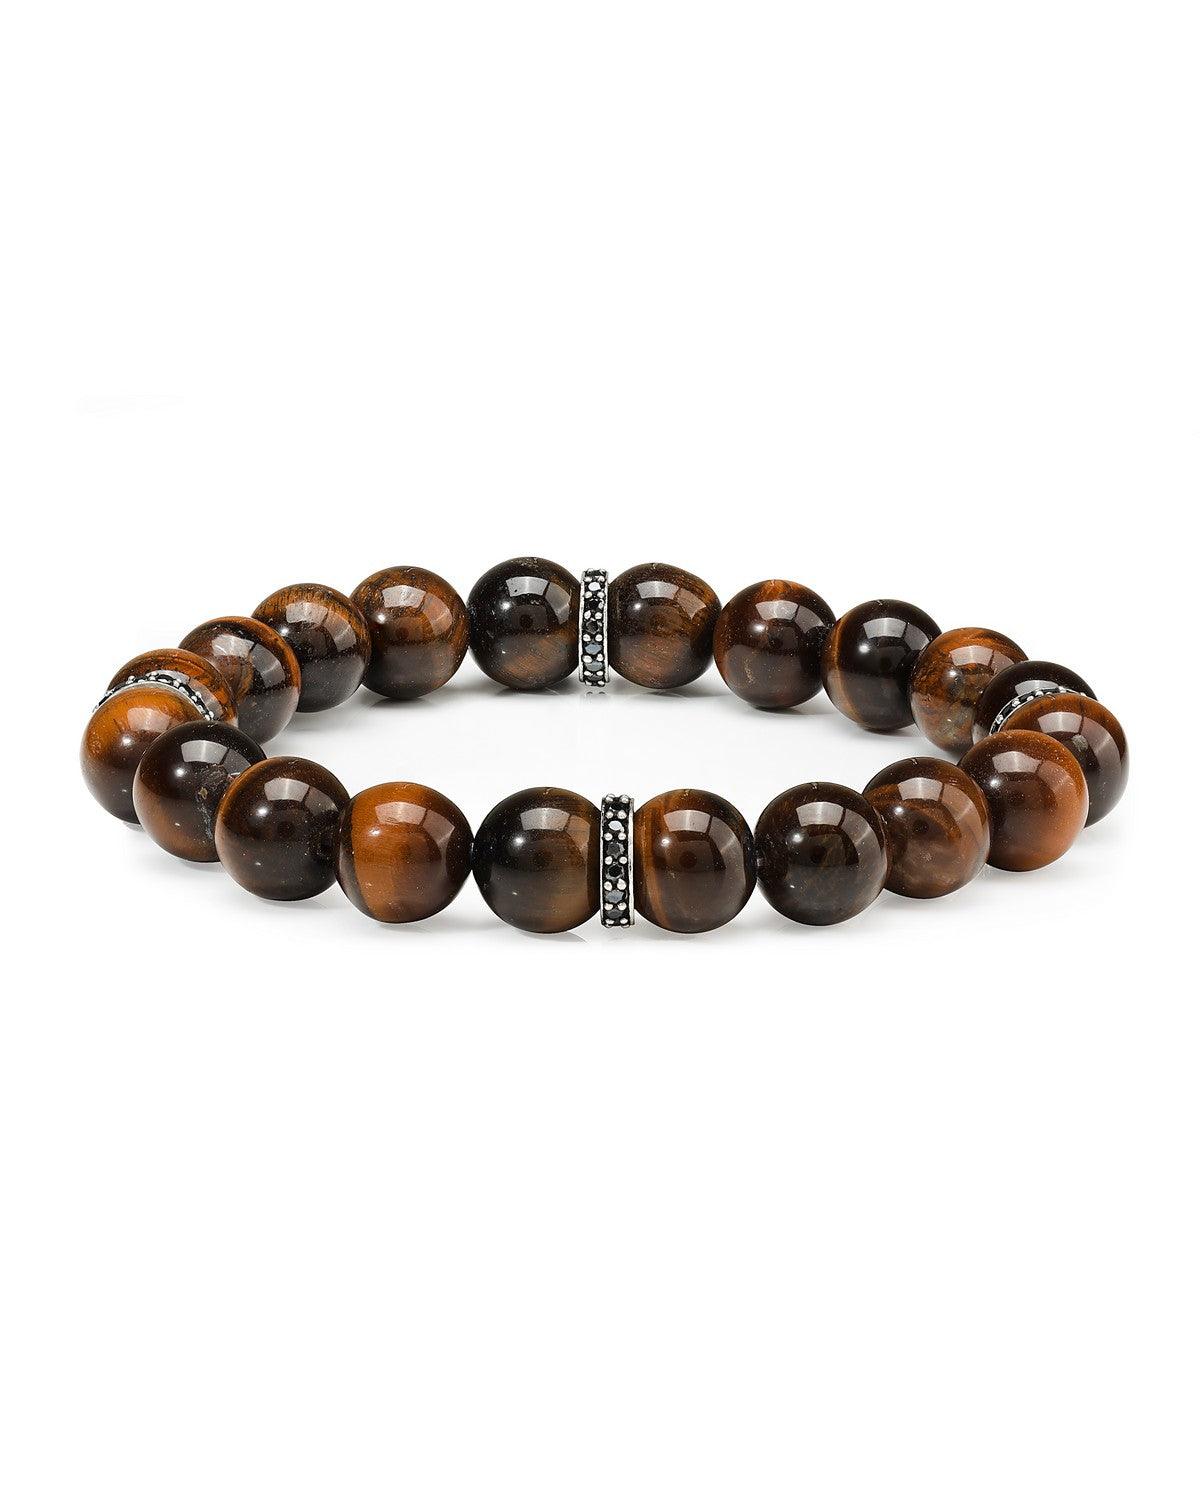 Red Tiger Eye Black Spinel 925 Sterling Silver Stretchable Beads Bracelet 7" For Men's Jewelry - YoTreasure